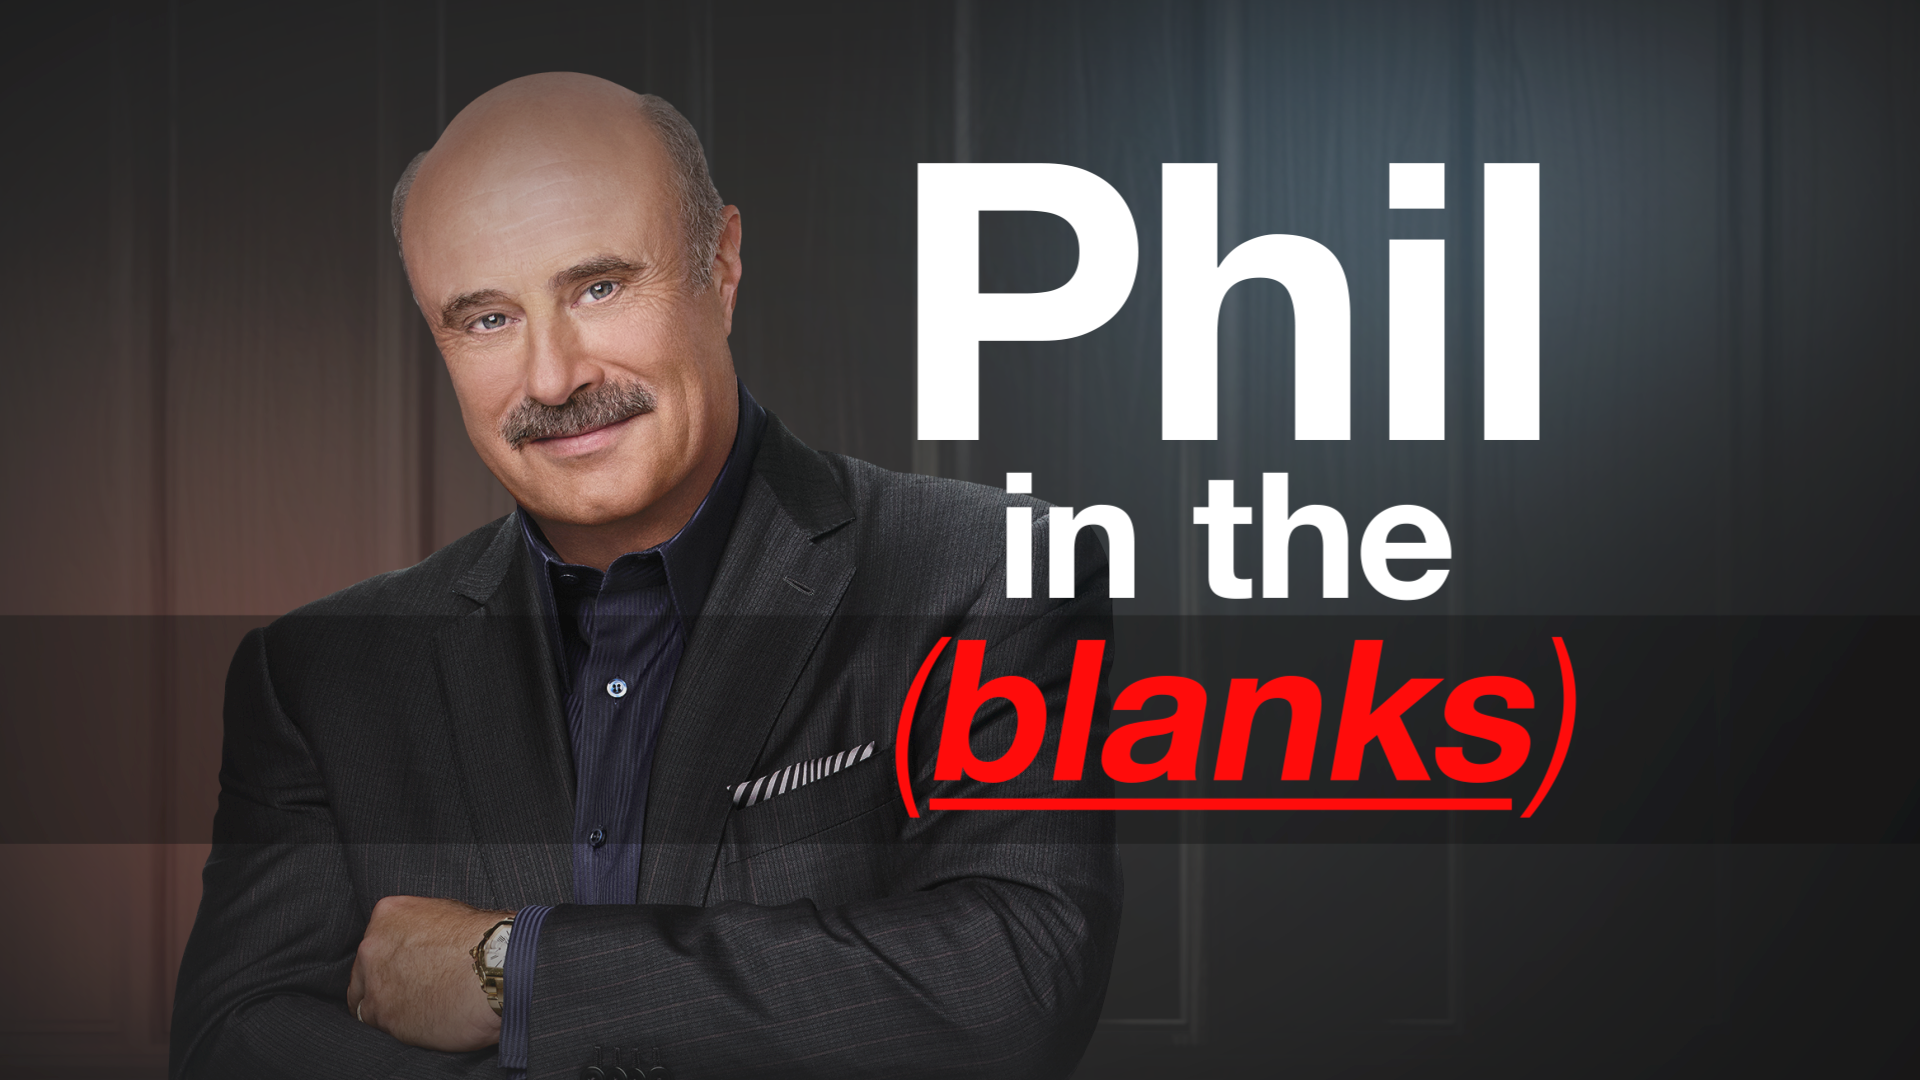 Advertise on Phil in the Blanks podcast with AudioGO